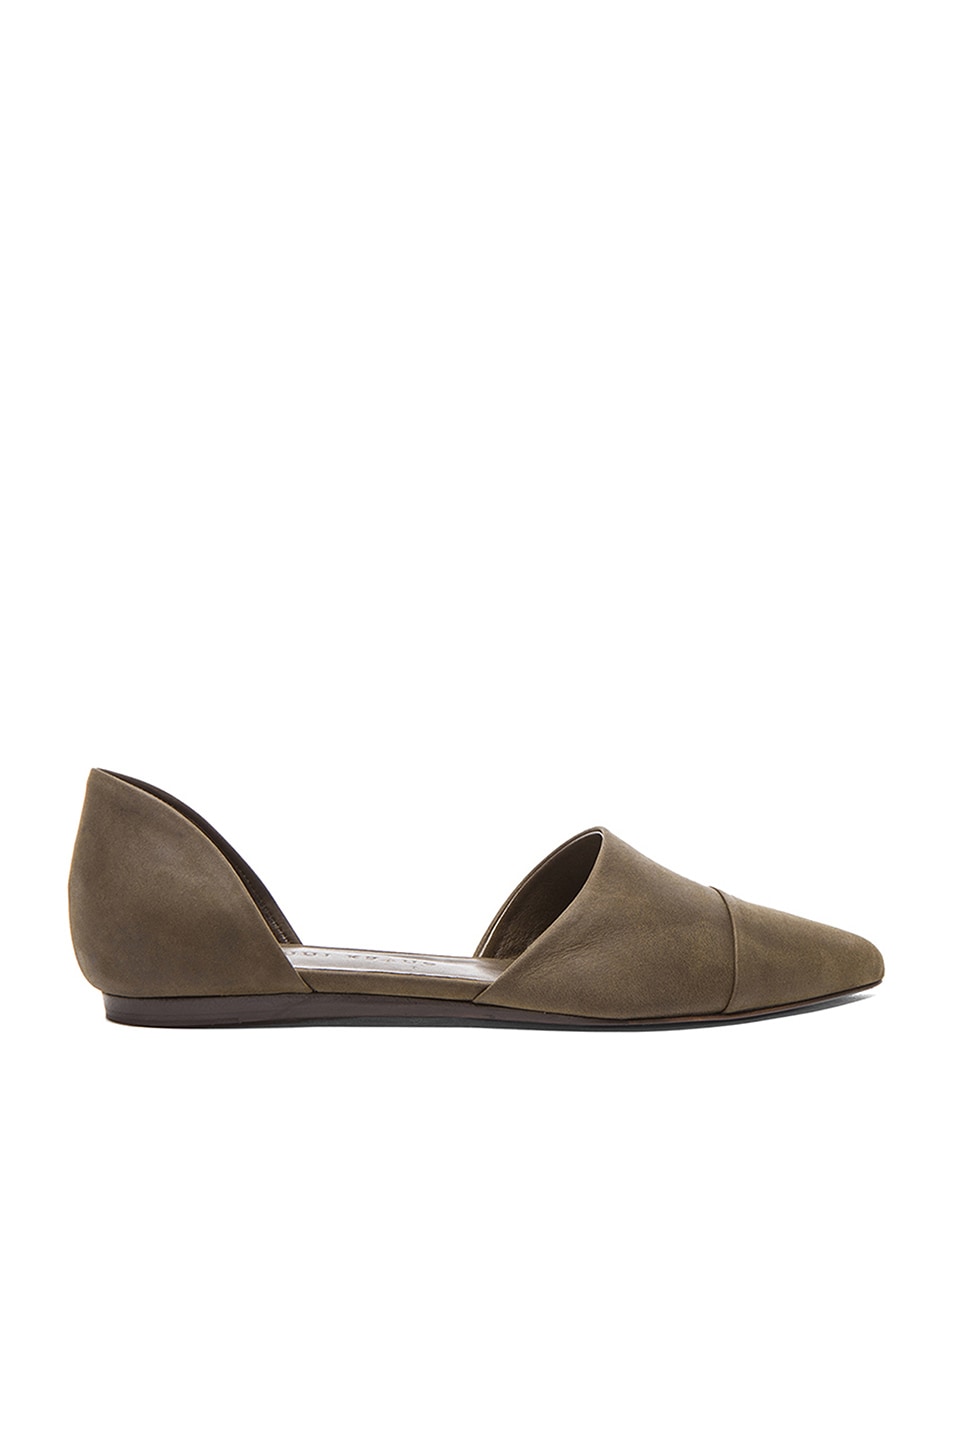 Image 1 of Jenni Kayne D'Orsay Oiled Leather Flats in Olive